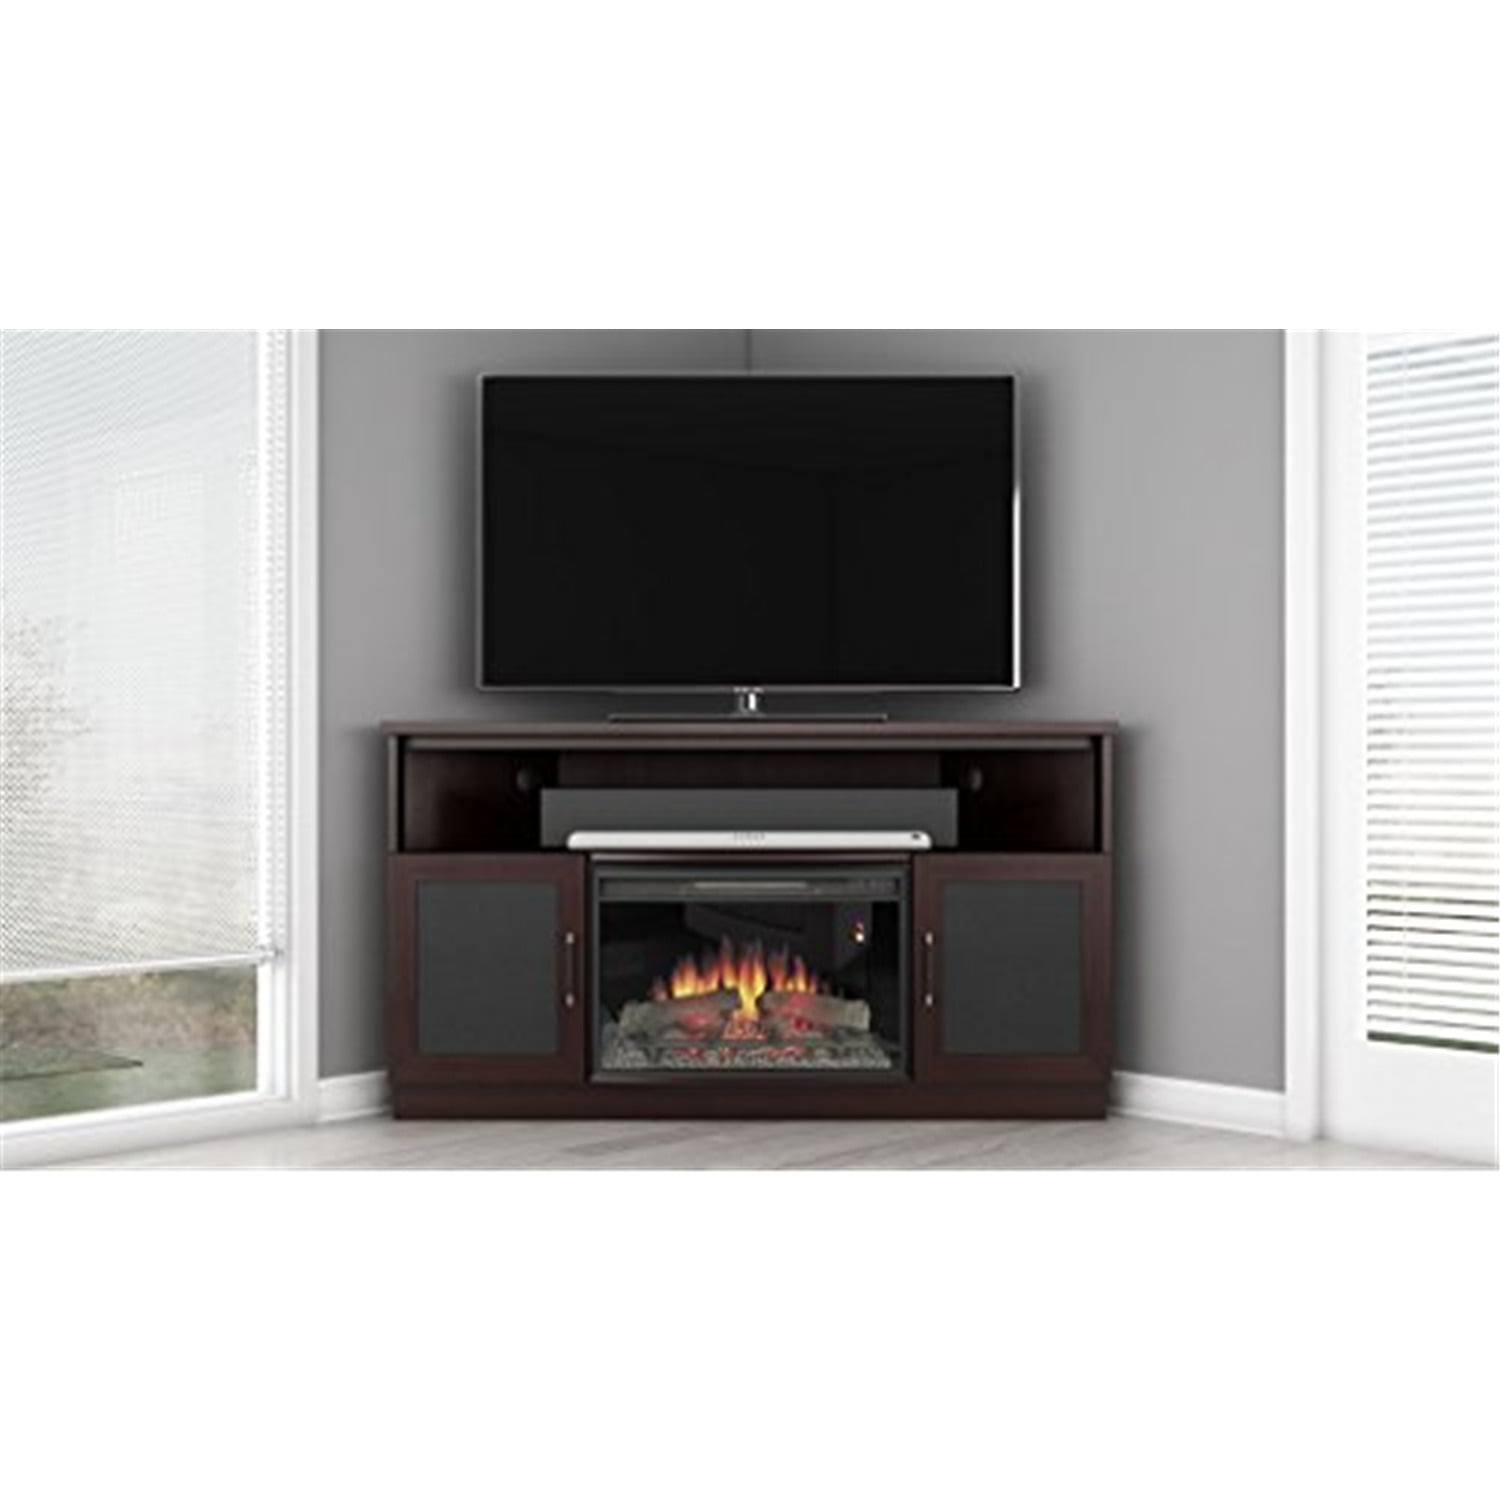 60 Contemporary Tv Corner Console With, 60 Corner Tv Stand With Fireplace